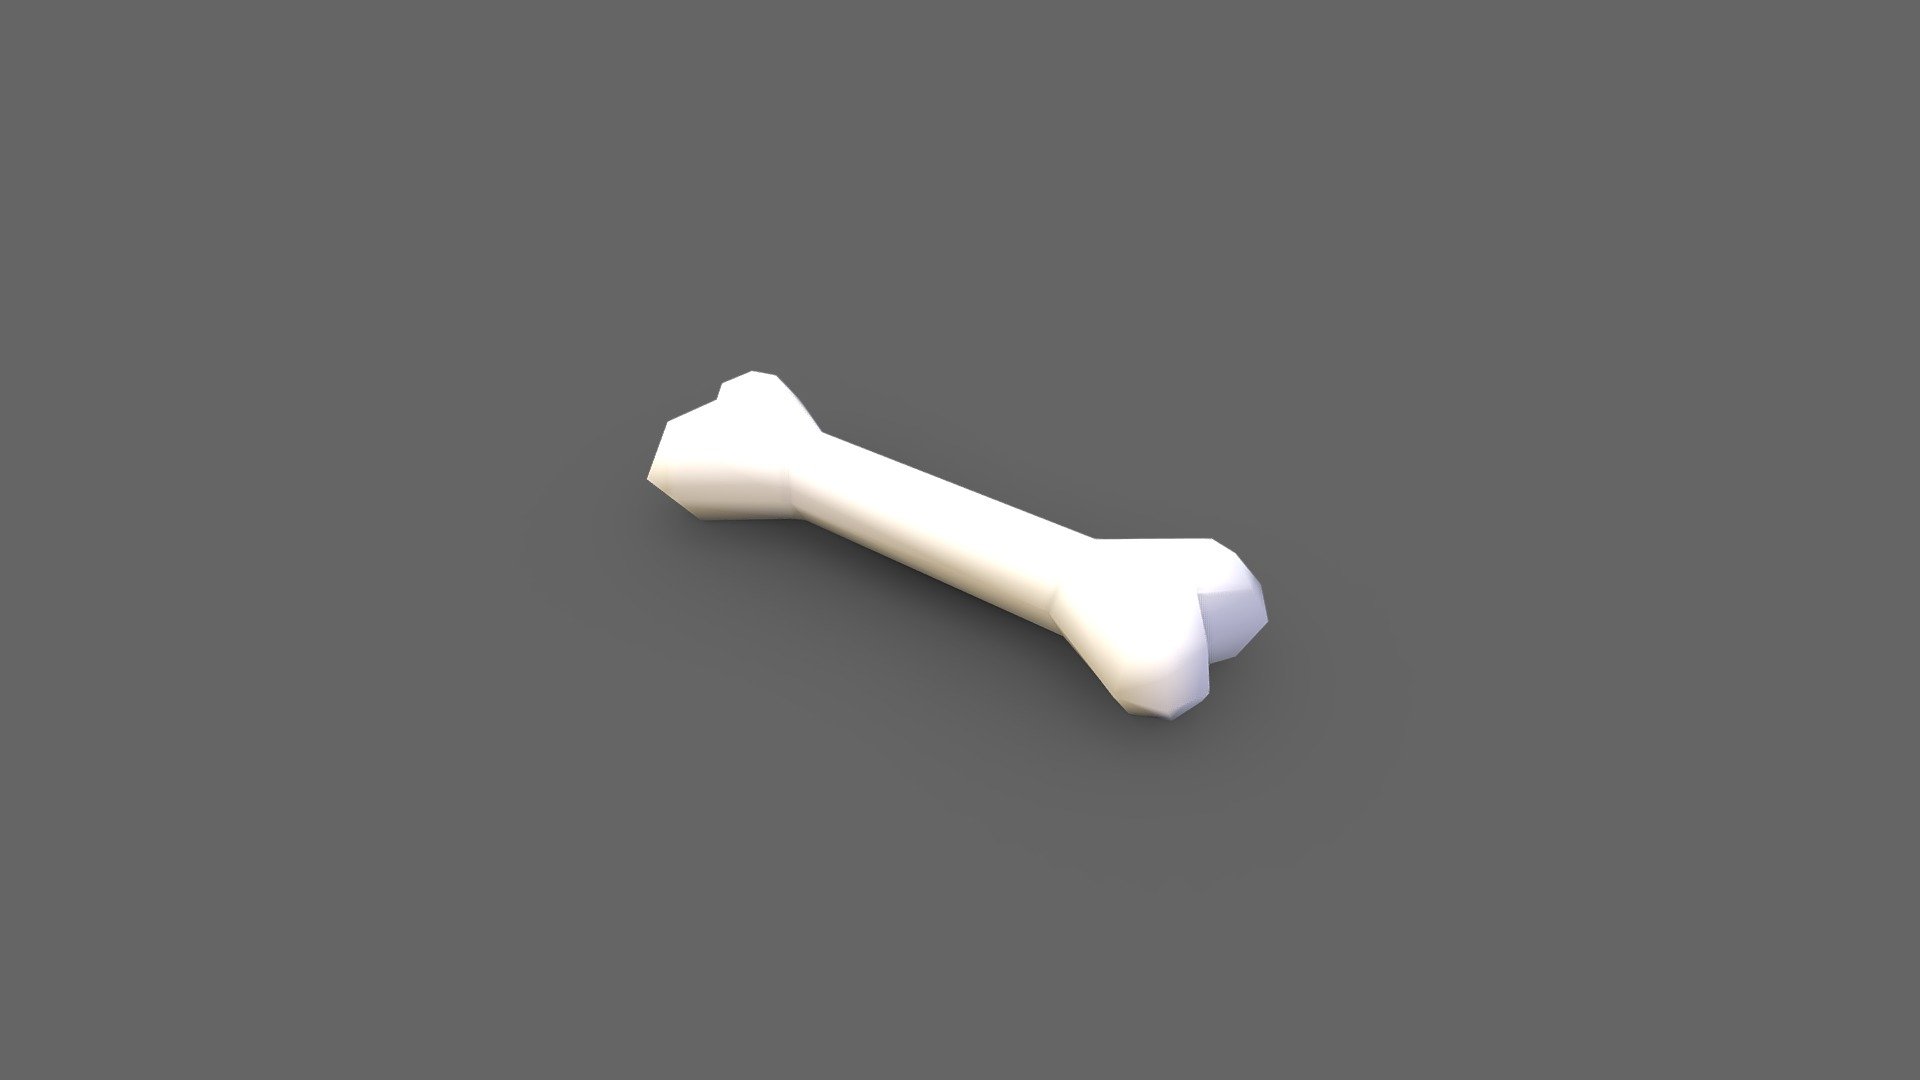 Bone 3D model low poly. Production-ready/Game-ready 3D Model, textures and UVs provided in the package.

Package Includes:

Formats: FBX,glTF; scenes: other:

1 Object (mesh), UV-mapped Textures.

UV Layout maps and Image Textures resolutions: 2048x2048.

Real world dimensions; scene scale units: cm in 3DS Max.

Polygon Count - Triangles: 128

Created in 3D’s Max and Textures made with Substance Painter and Photoshop - Halloween Bone low-poly [Game Ready] - Download Free 3D model by Raphael C (@Qurka) 3d model